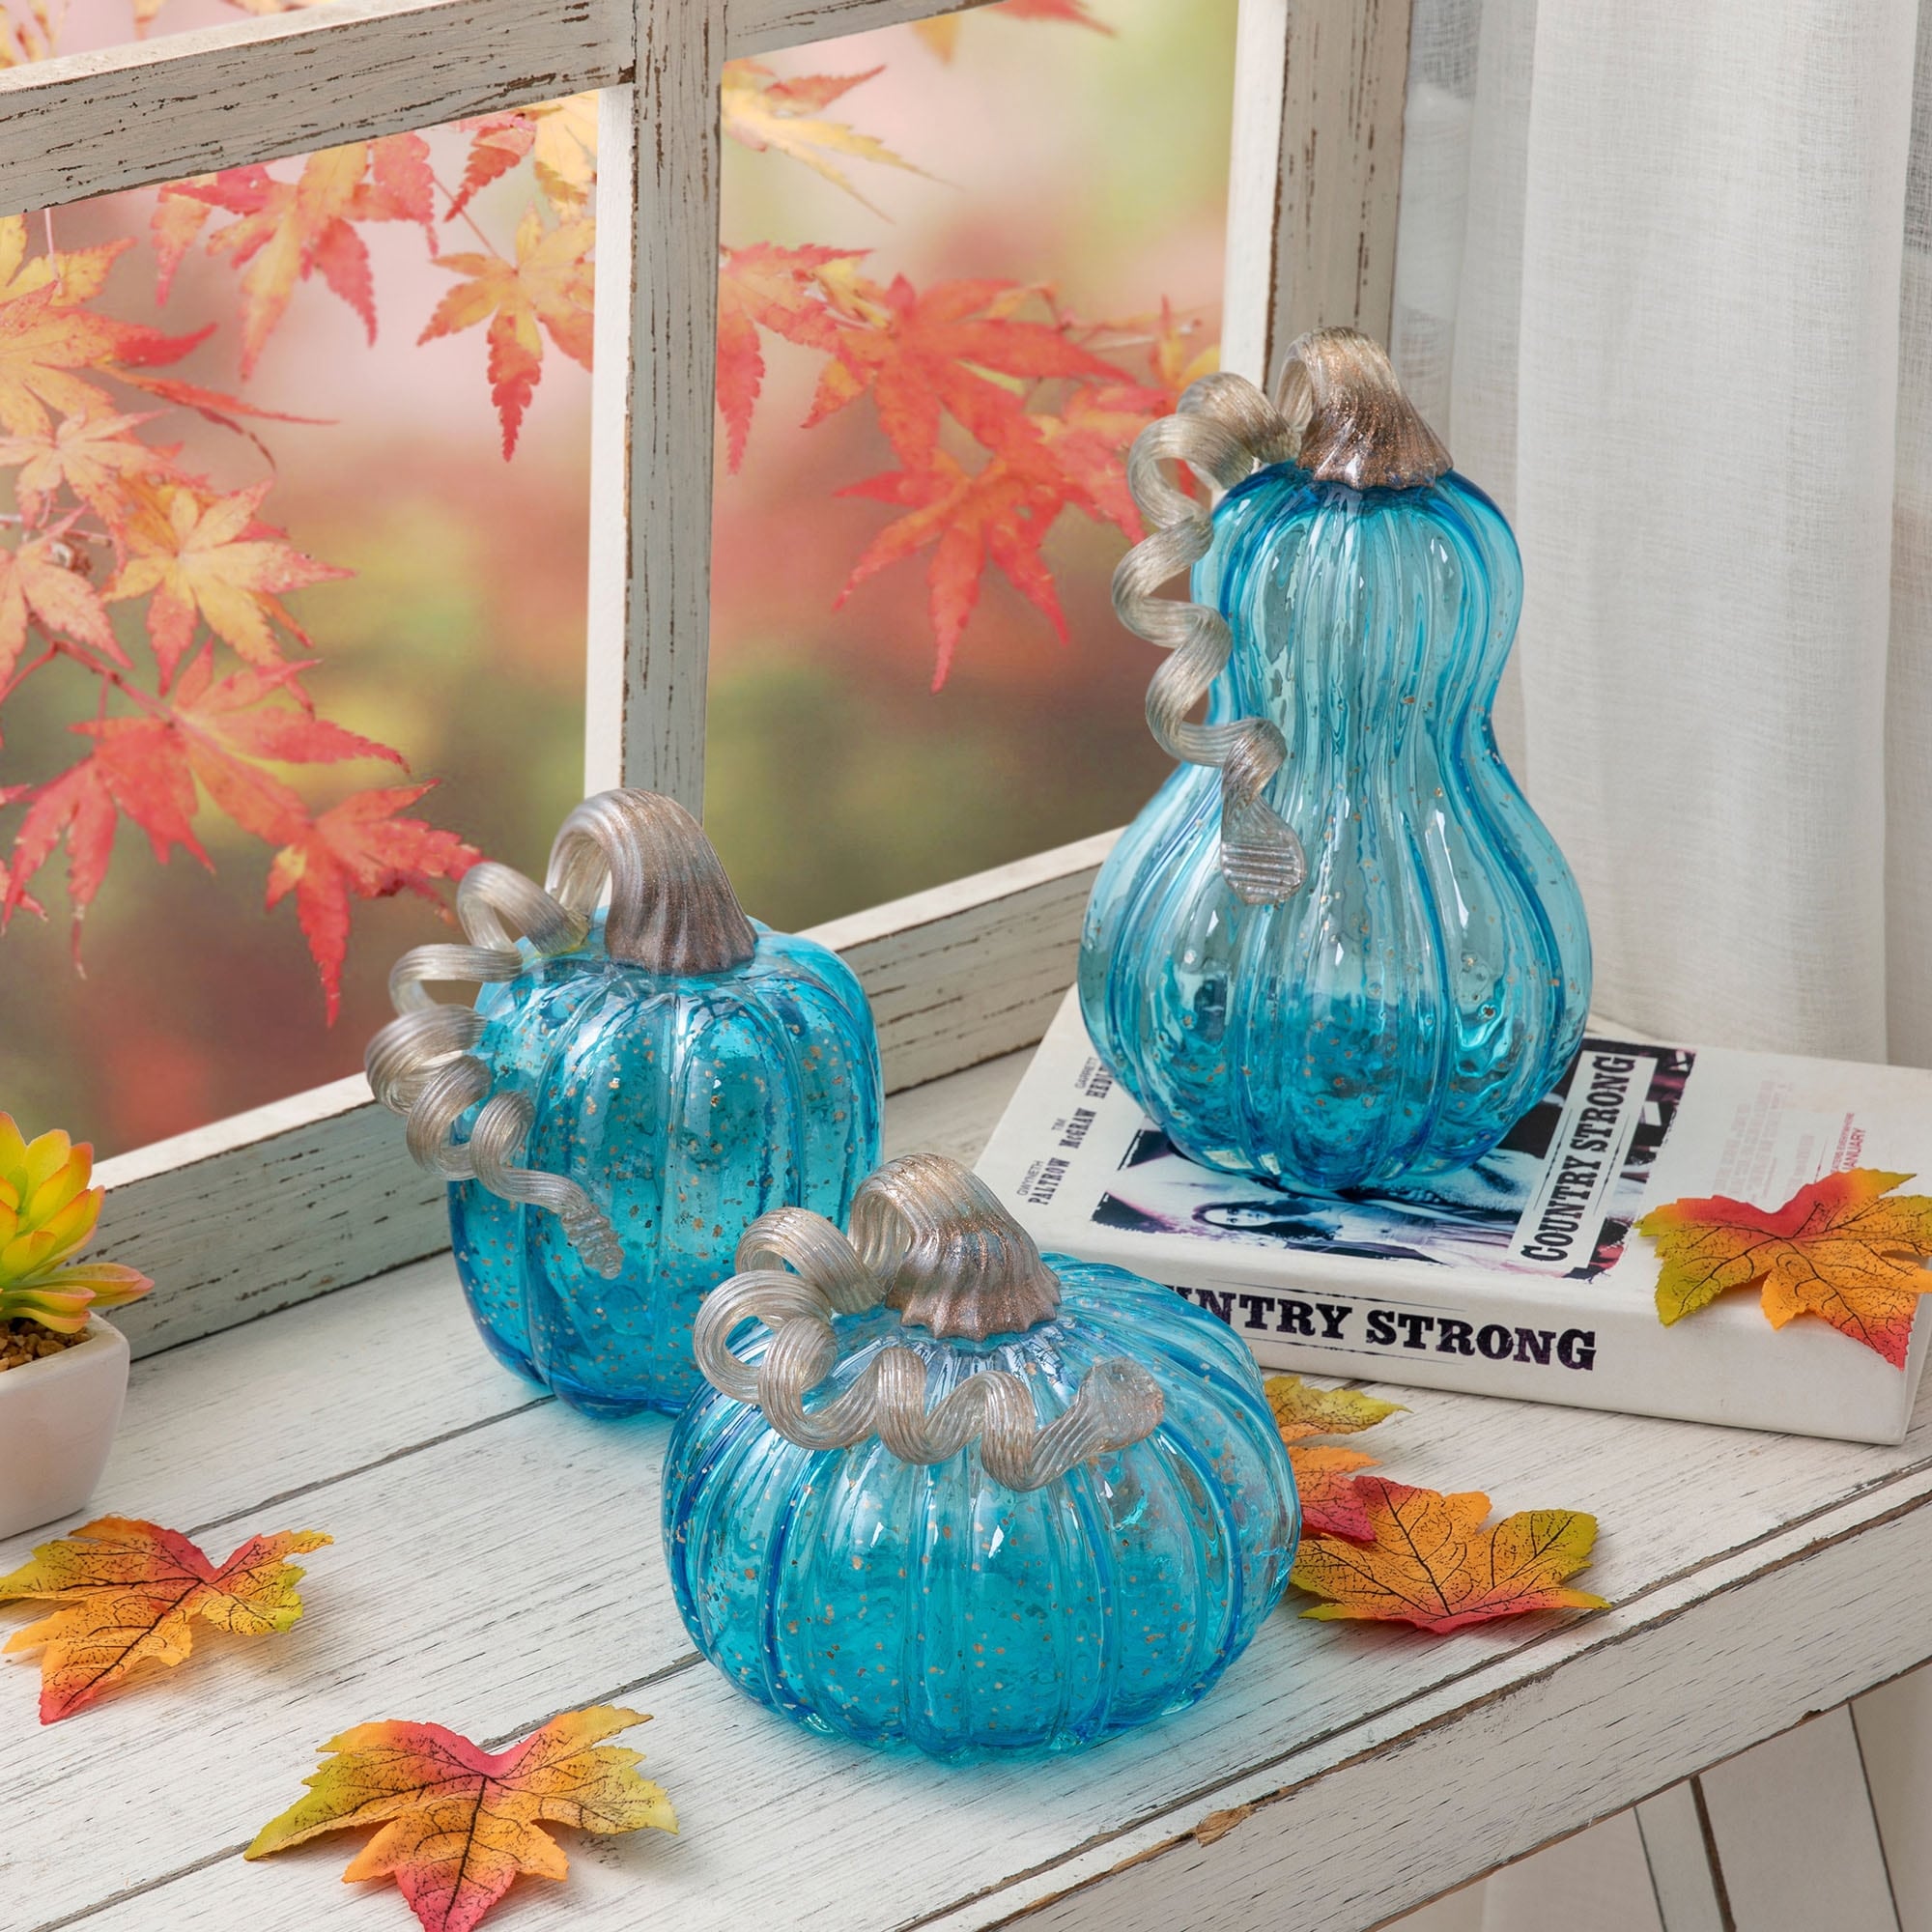 https://ak1.ostkcdn.com/images/products/is/images/direct/f1d34f5be58a026a3c33c898b007d9b80b431340/Glitzhome-Blue-Handblown-Glass-Pumpkins.jpg